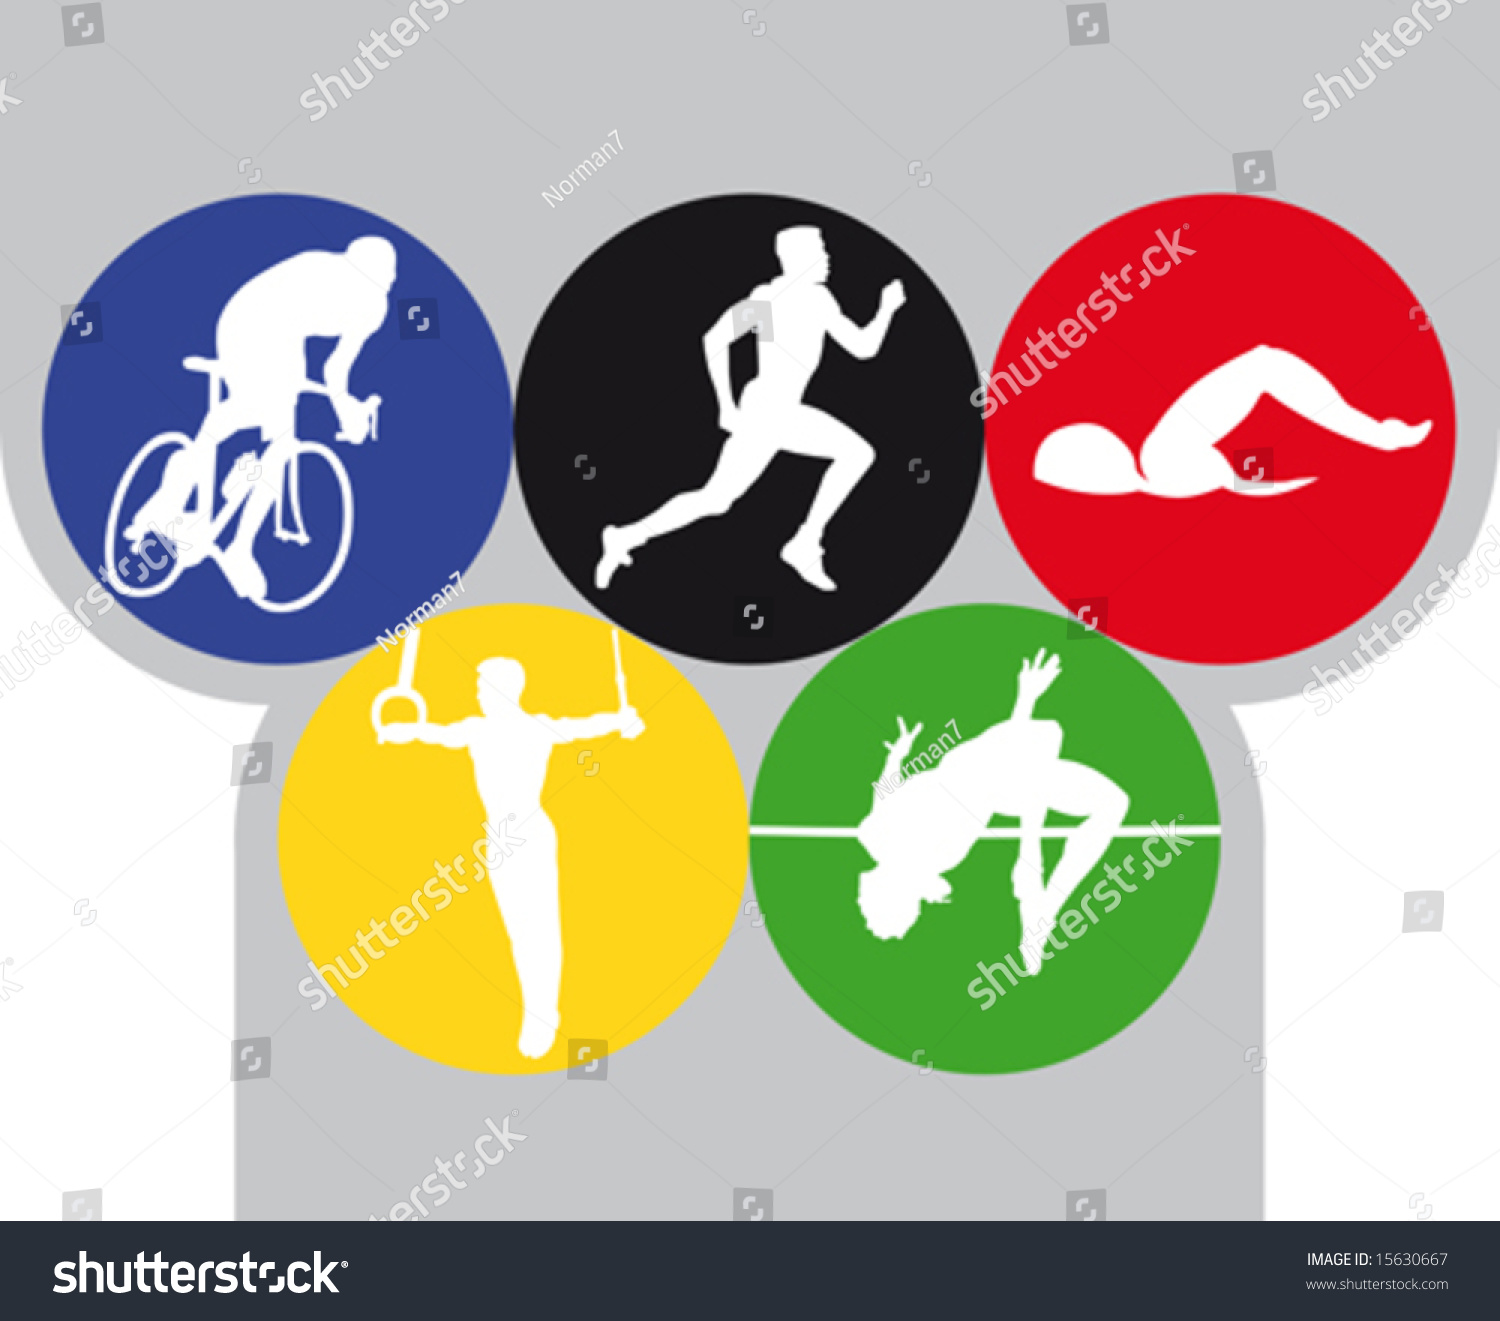 olympic games clipart - photo #16